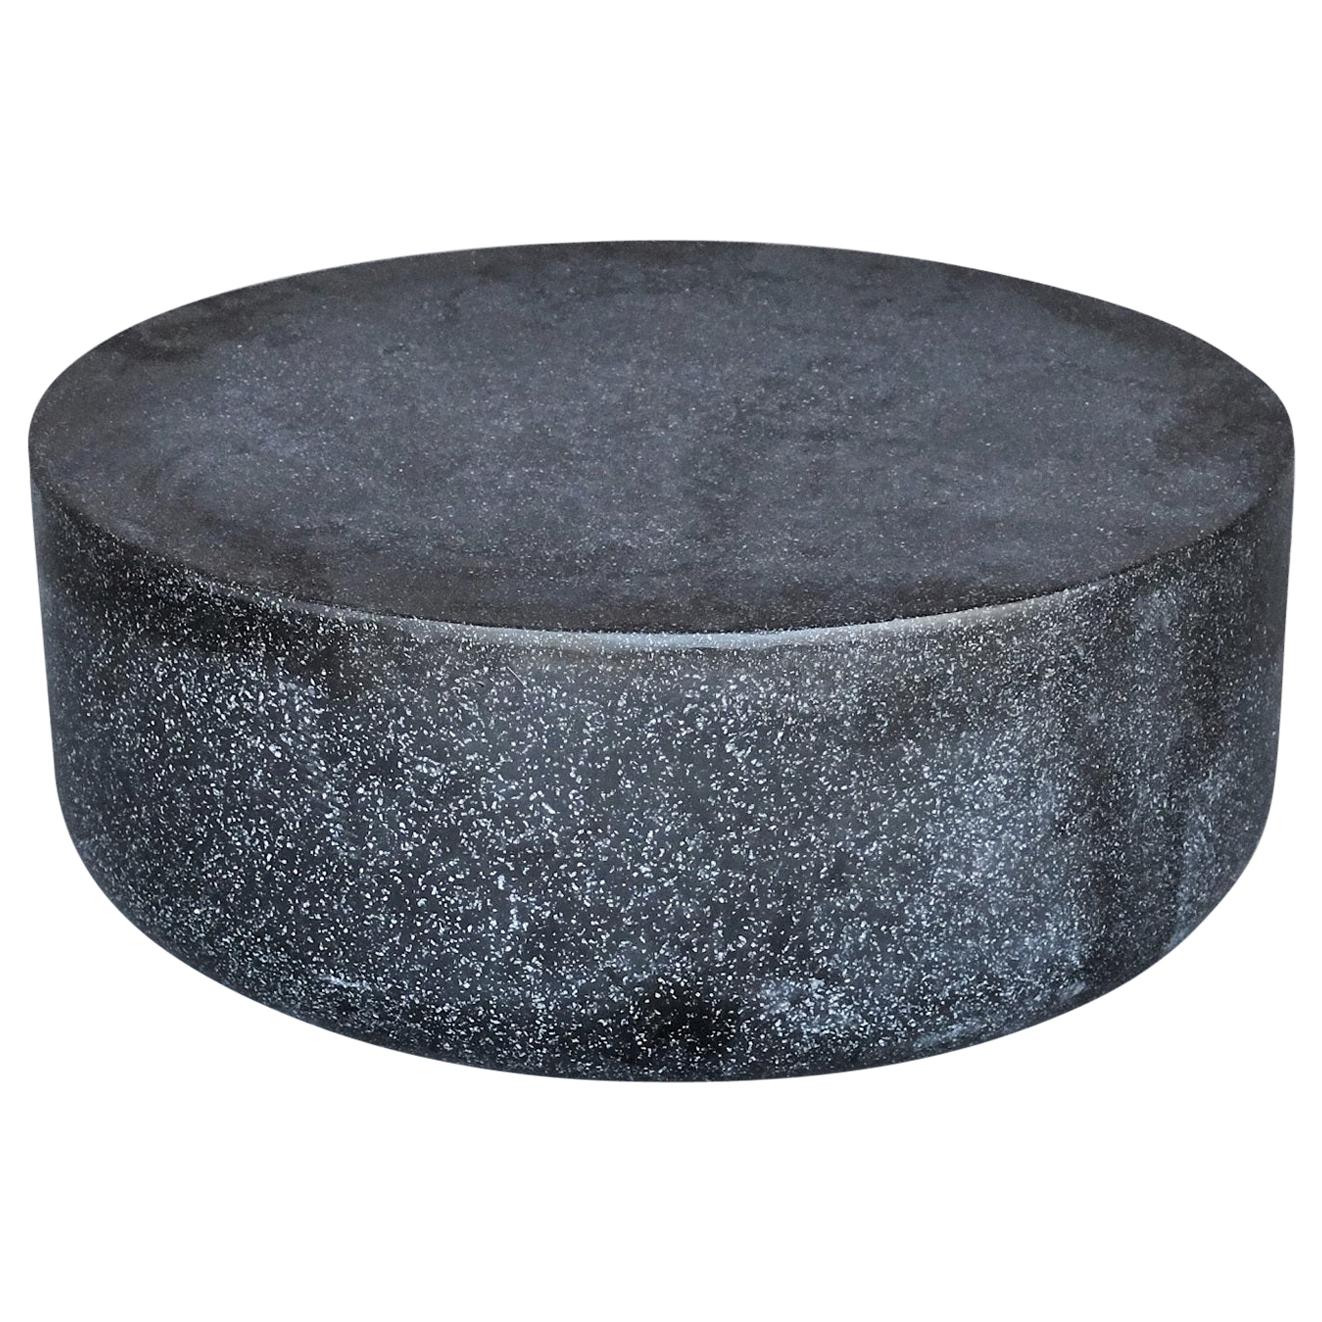 Cast Resin 'Millstone' Coffee Table, Coal Stone Finish by Zachary A. Design For Sale